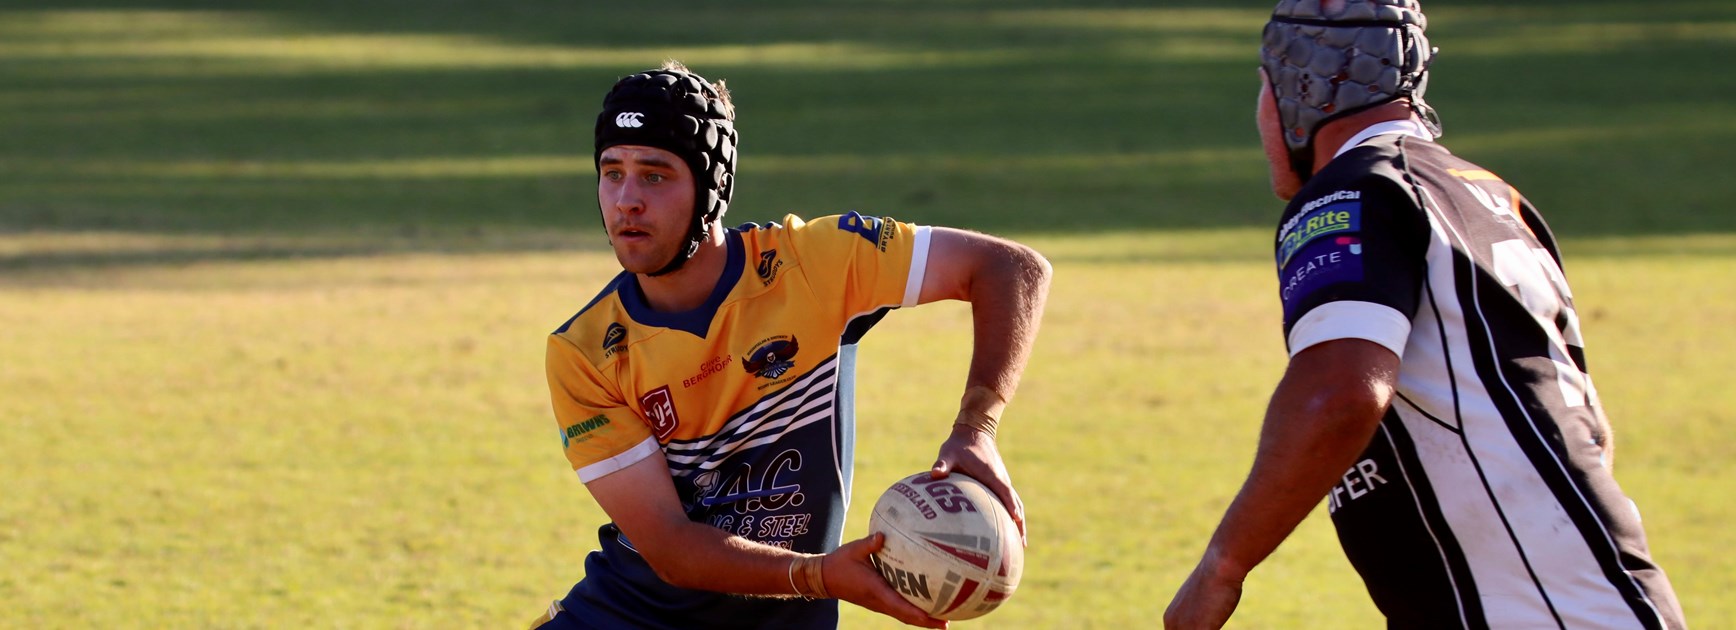 Toowoomba Round 17 A grade preview: Stage set for big weekend